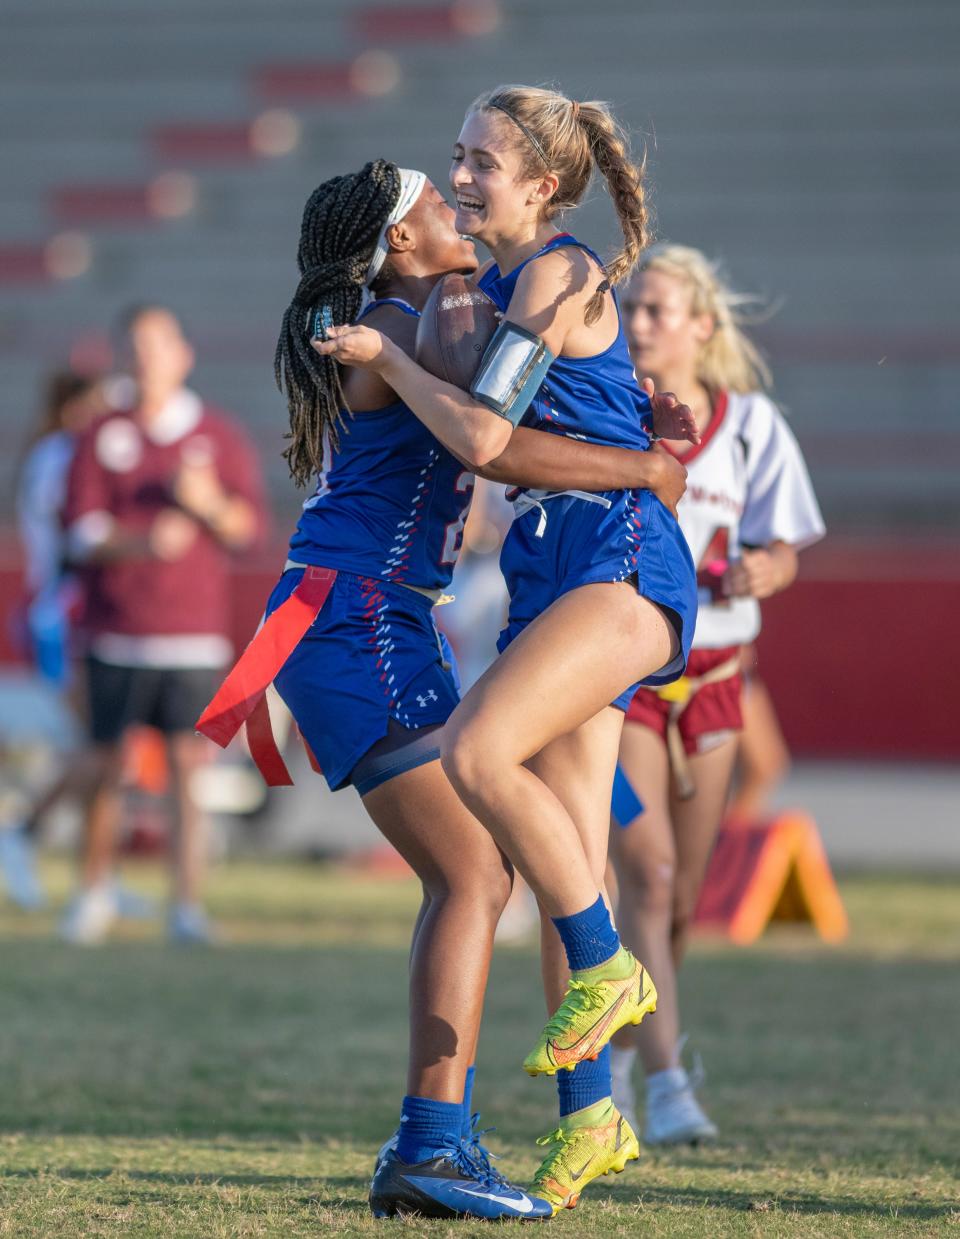 Berkleigh Jernigan (9) celebrates with Ashten Dickerson (20) after making a touchdown to tie the score at 6-6 during the Chiles vs Pace girls flag football game at Pace High School on Thursday, May 5, 2022.